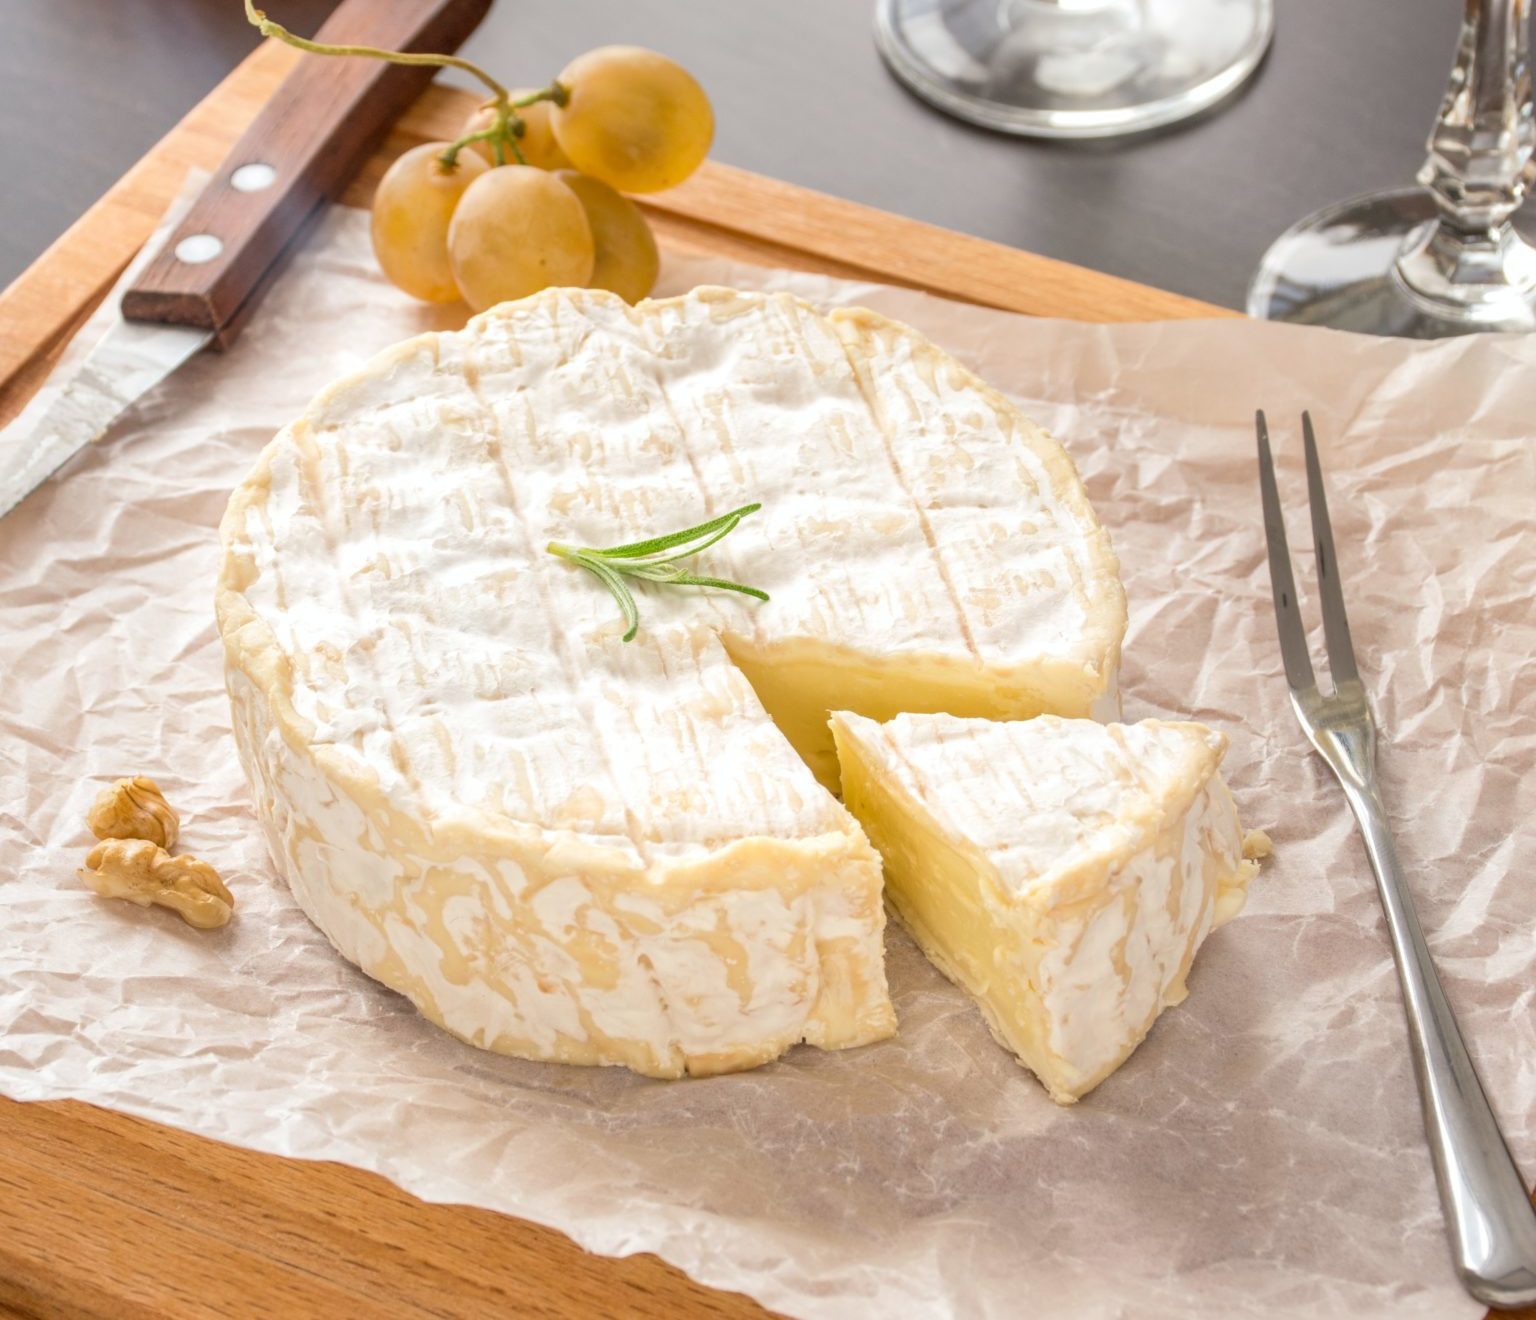 French food tech company Standing Ovation nabs $12 million for animal-free dairy cheese